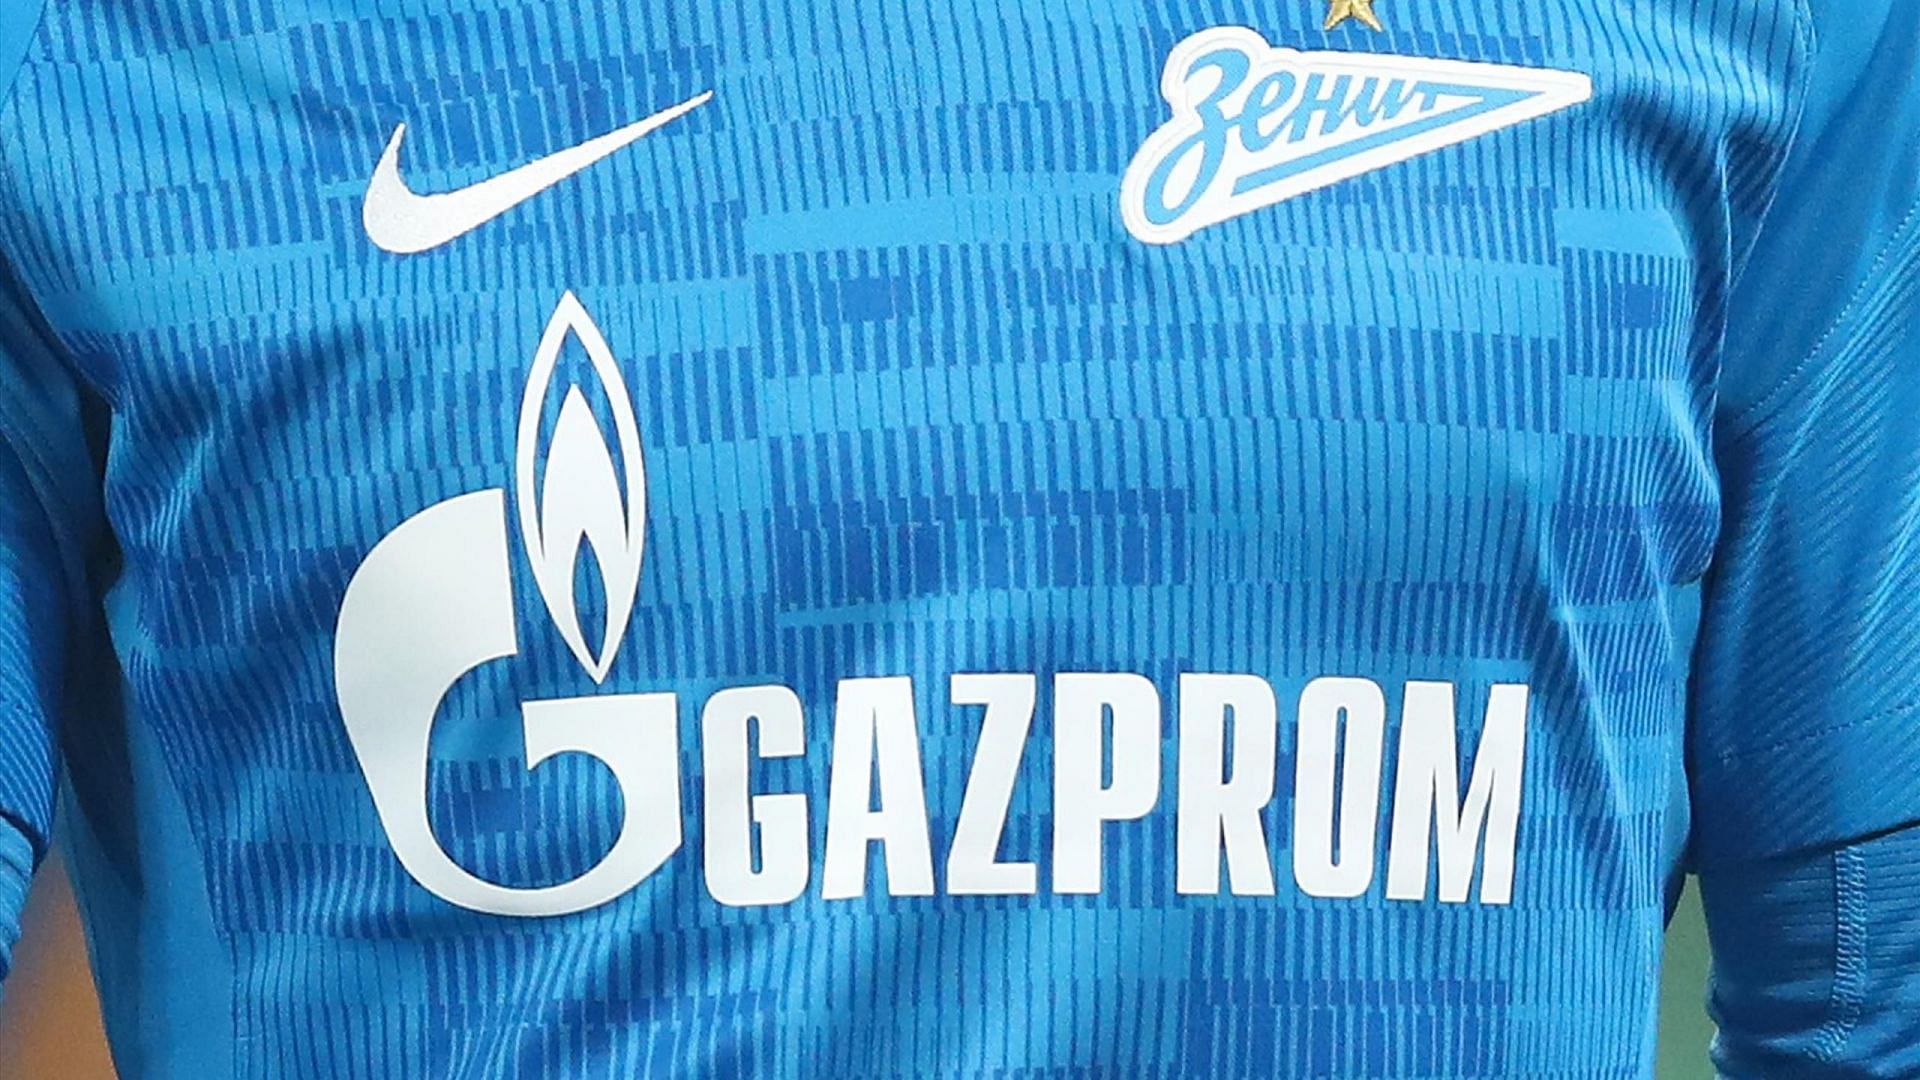 Zenit stand as the only Russian club that may get away with pretty much everything from the ongoing crisis.